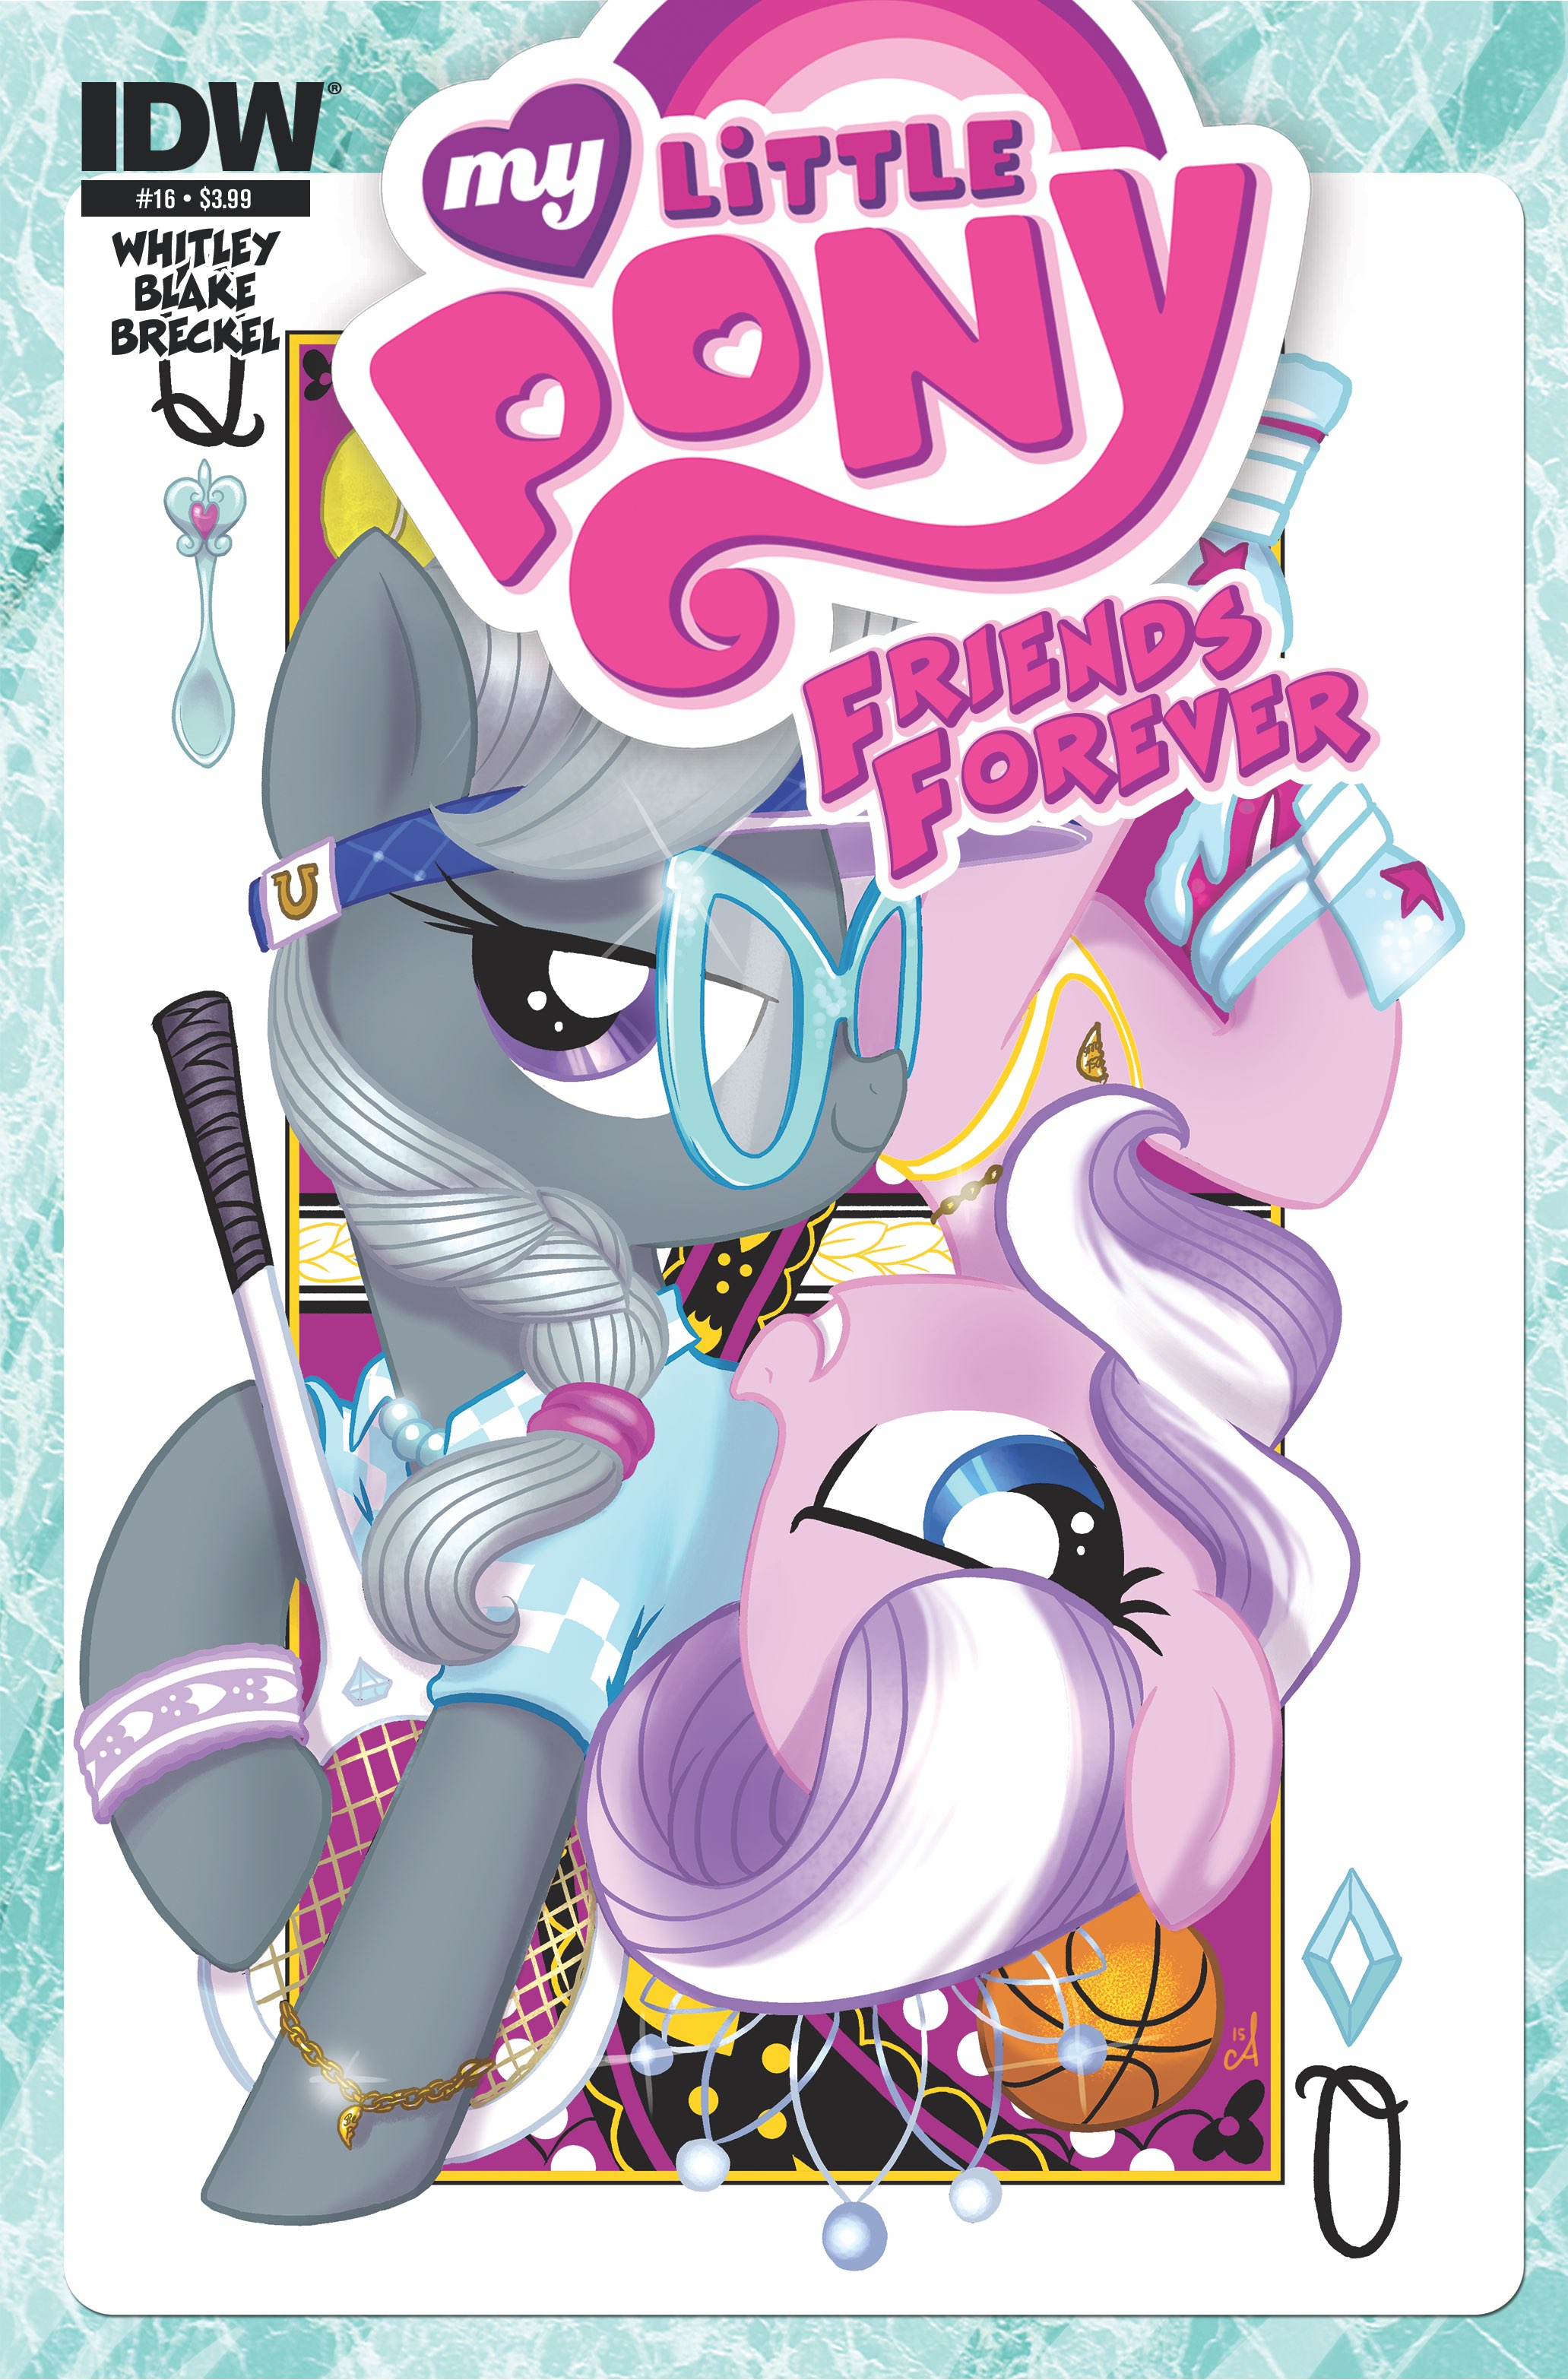 My Little Pony: Friends Forever #16 Review